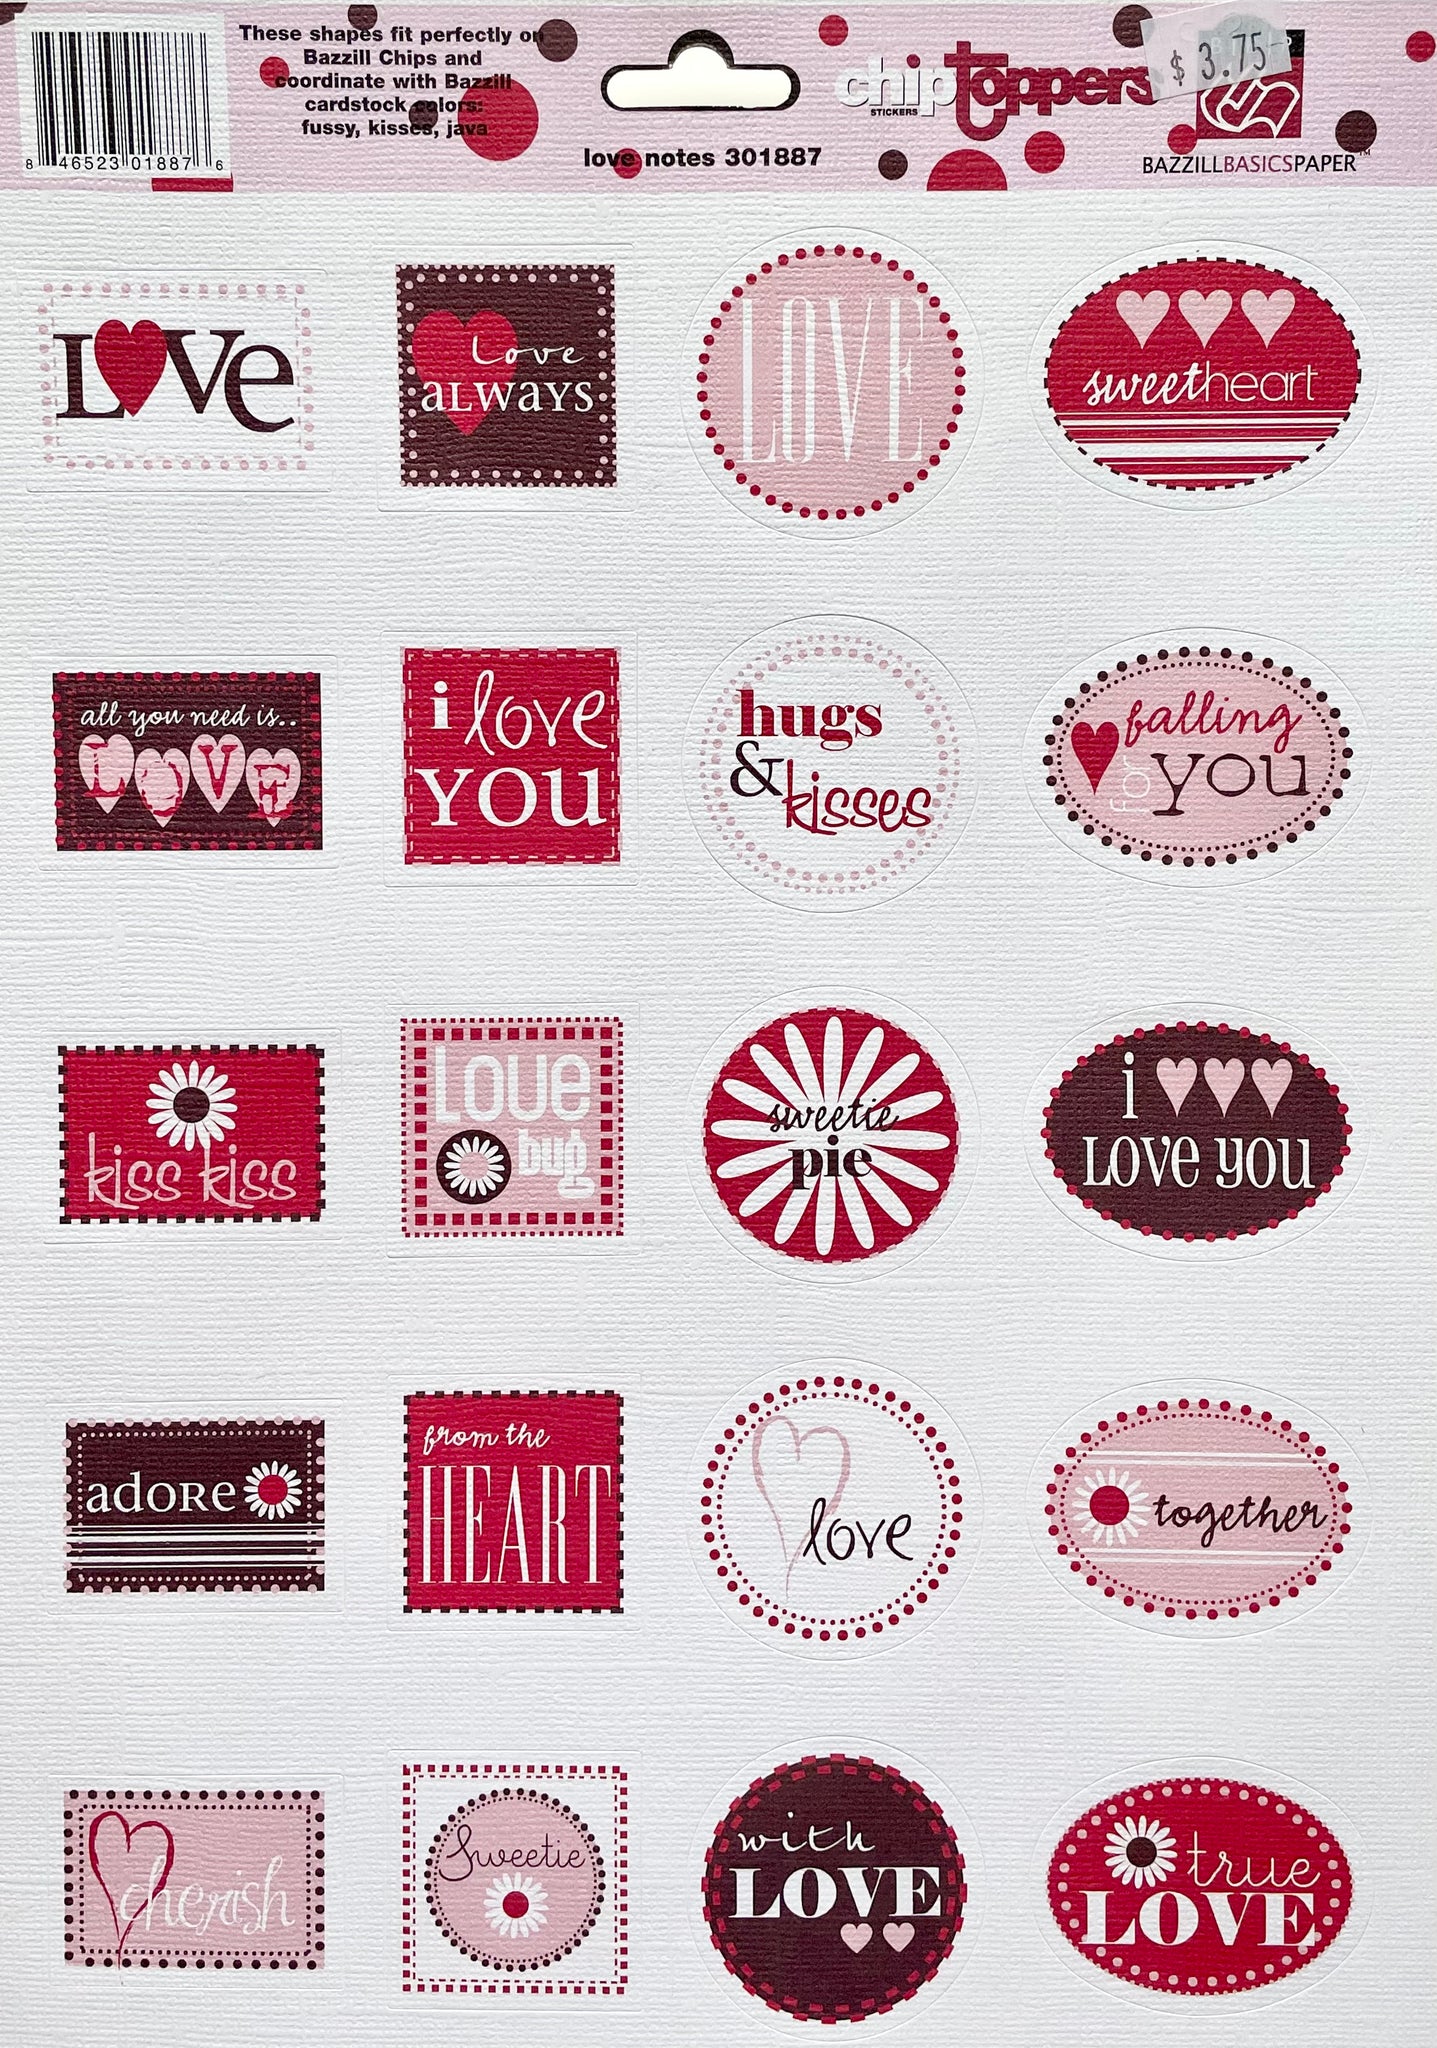 Love Notes Bazzill Stickers